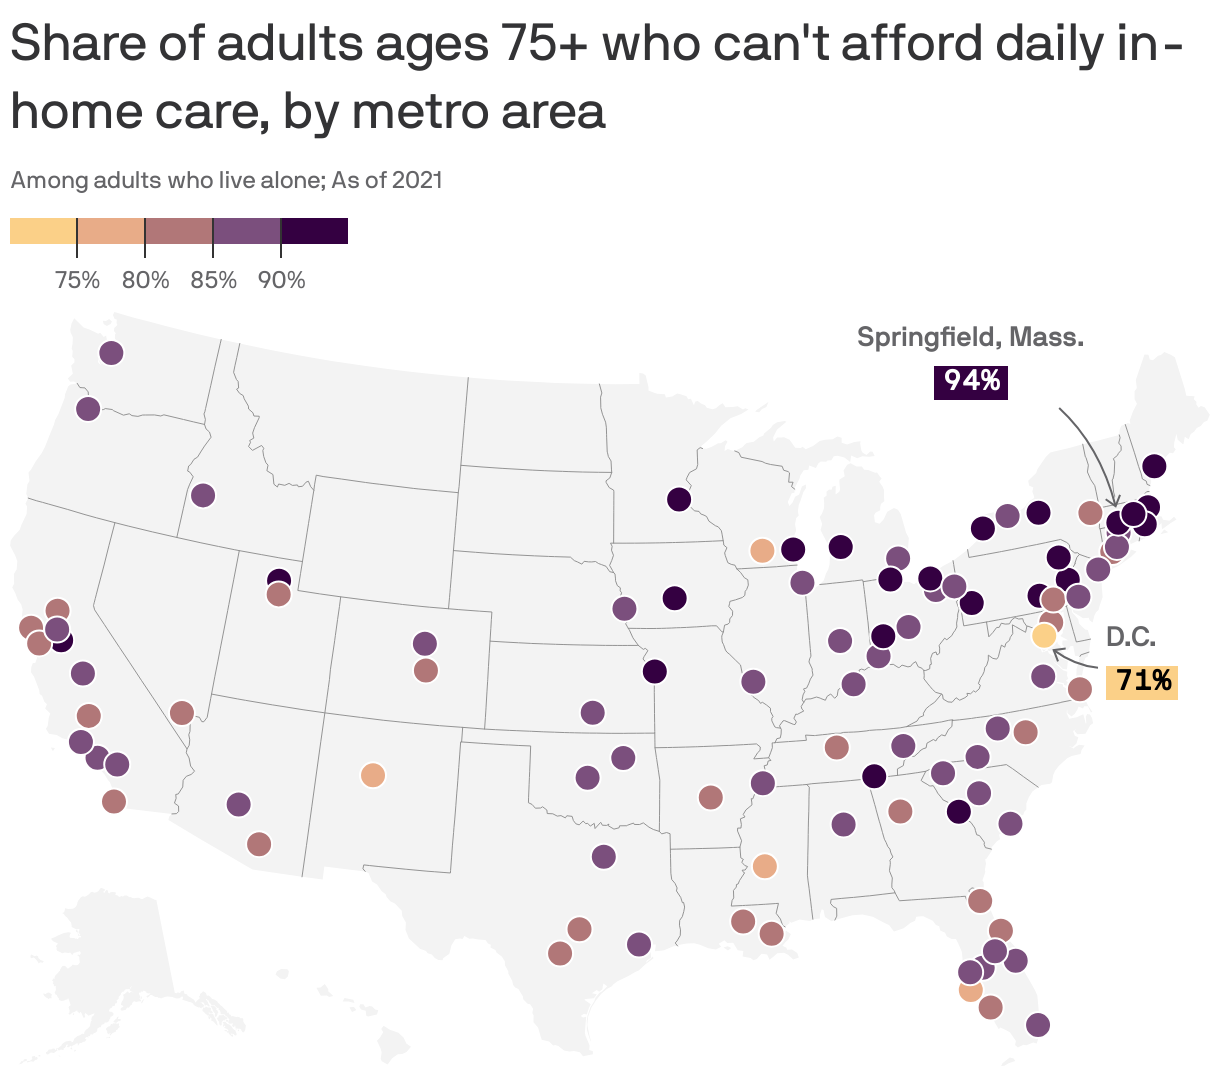 Share of adults ages 75+ who can't afford daily in-home care, by metro area